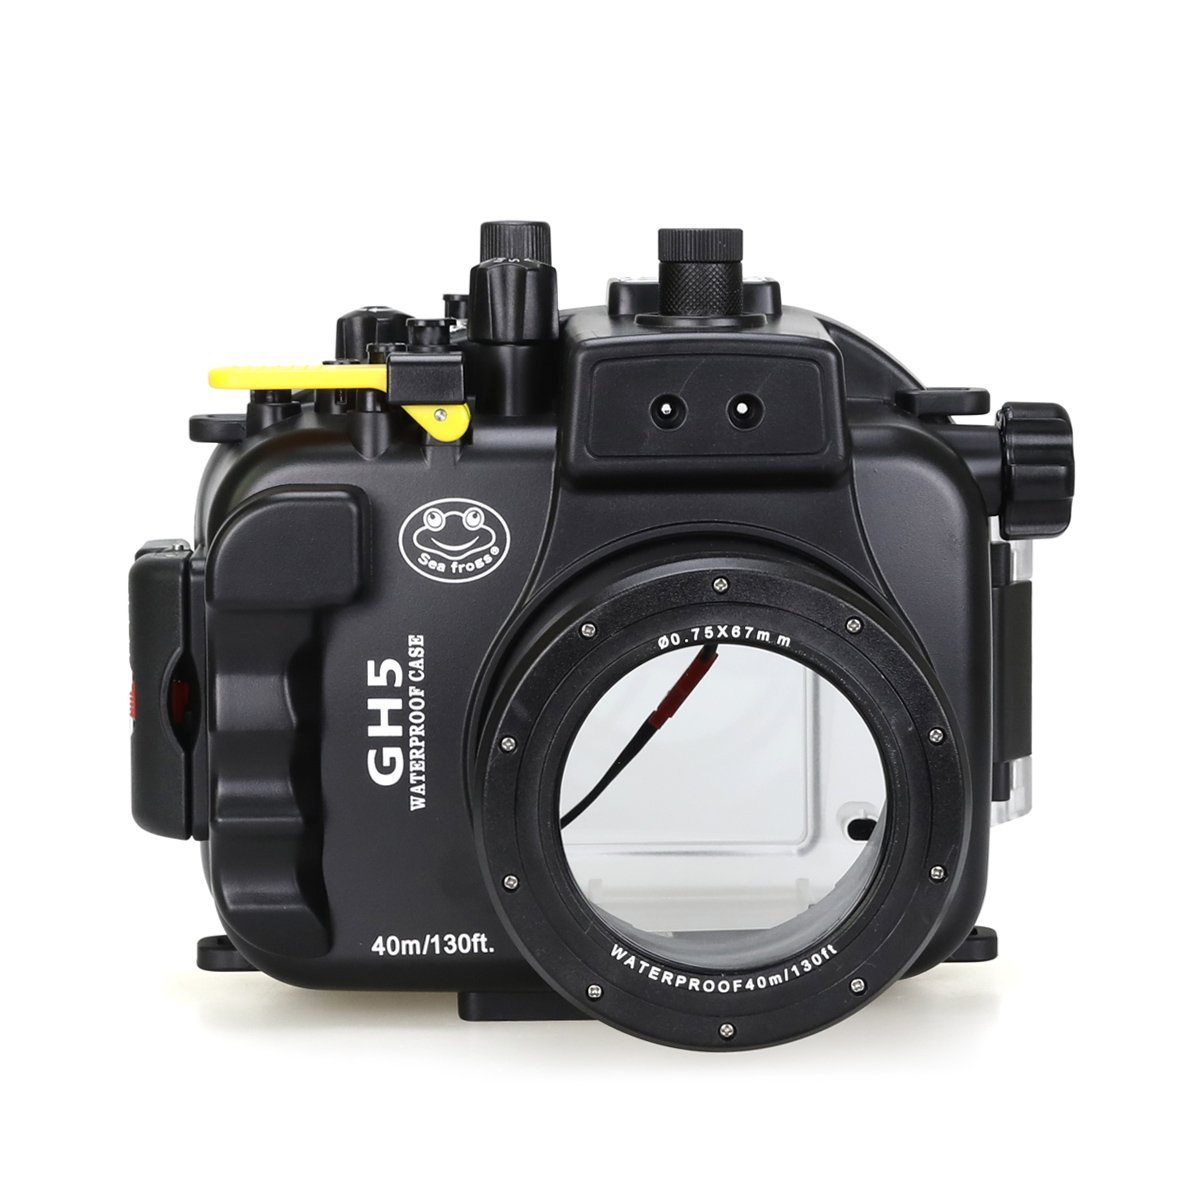 SeaFrogs Waterproof Case for Panasonic Lumix GH5/ GH5 S/ GH5 II